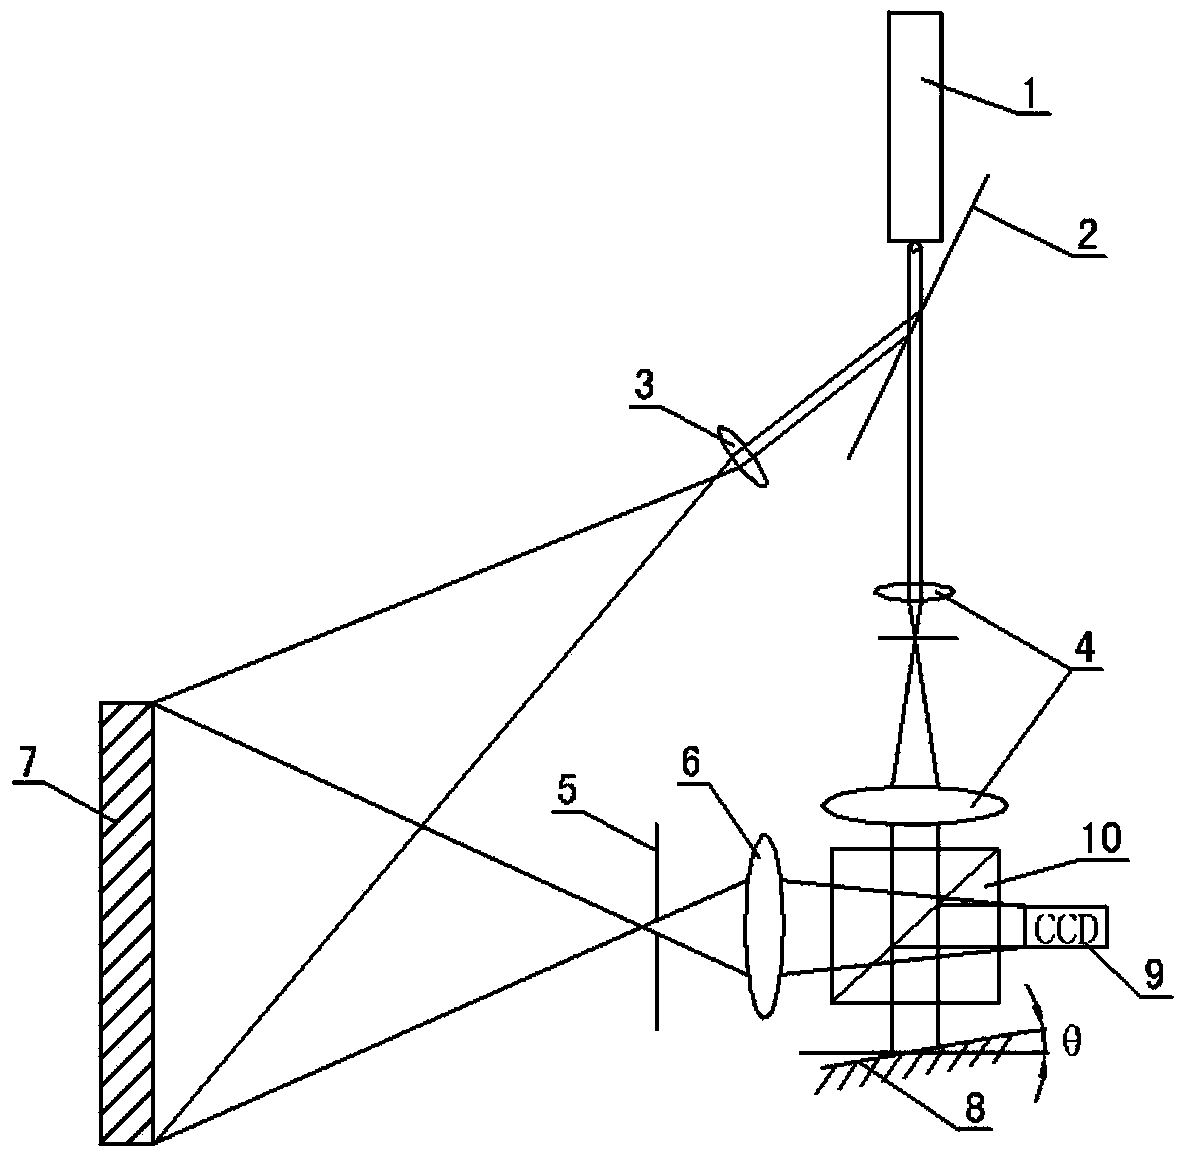 Single image rapid phase displacement system and phase detection method based on deflection angles